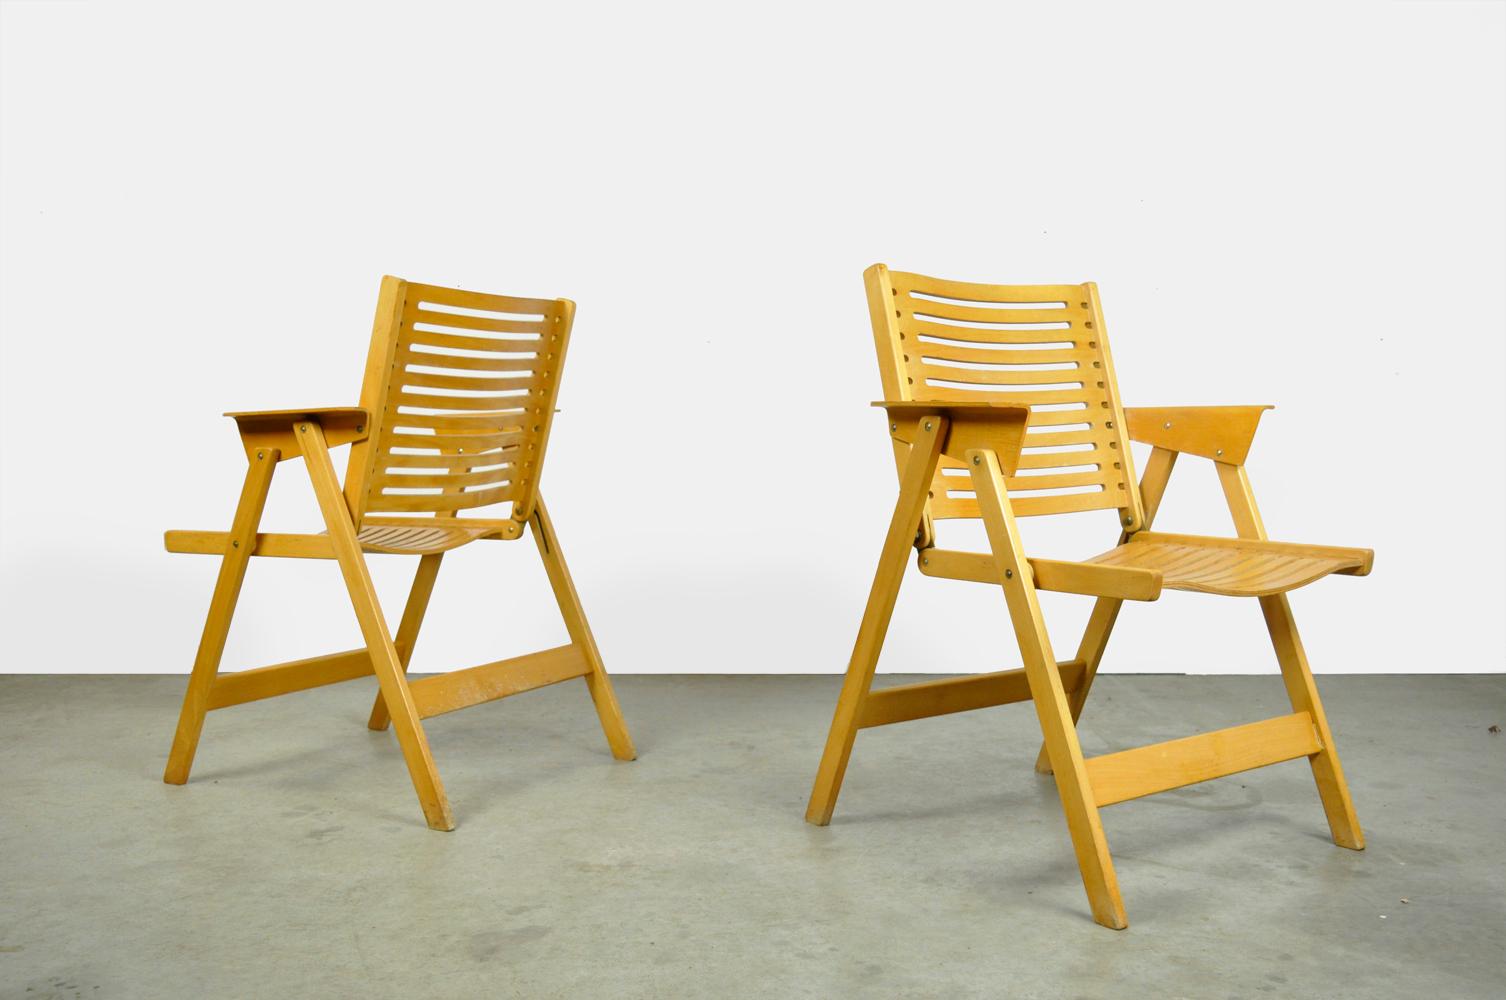 Original vintage folding beech armchairs/dining table chairs designed in the 1950s by the Slovenian architect Niko Kralj (1920-2013) for Stol. The chairs consist of solid beech seats and beautifully designed beech plywood armrests. The appearance of